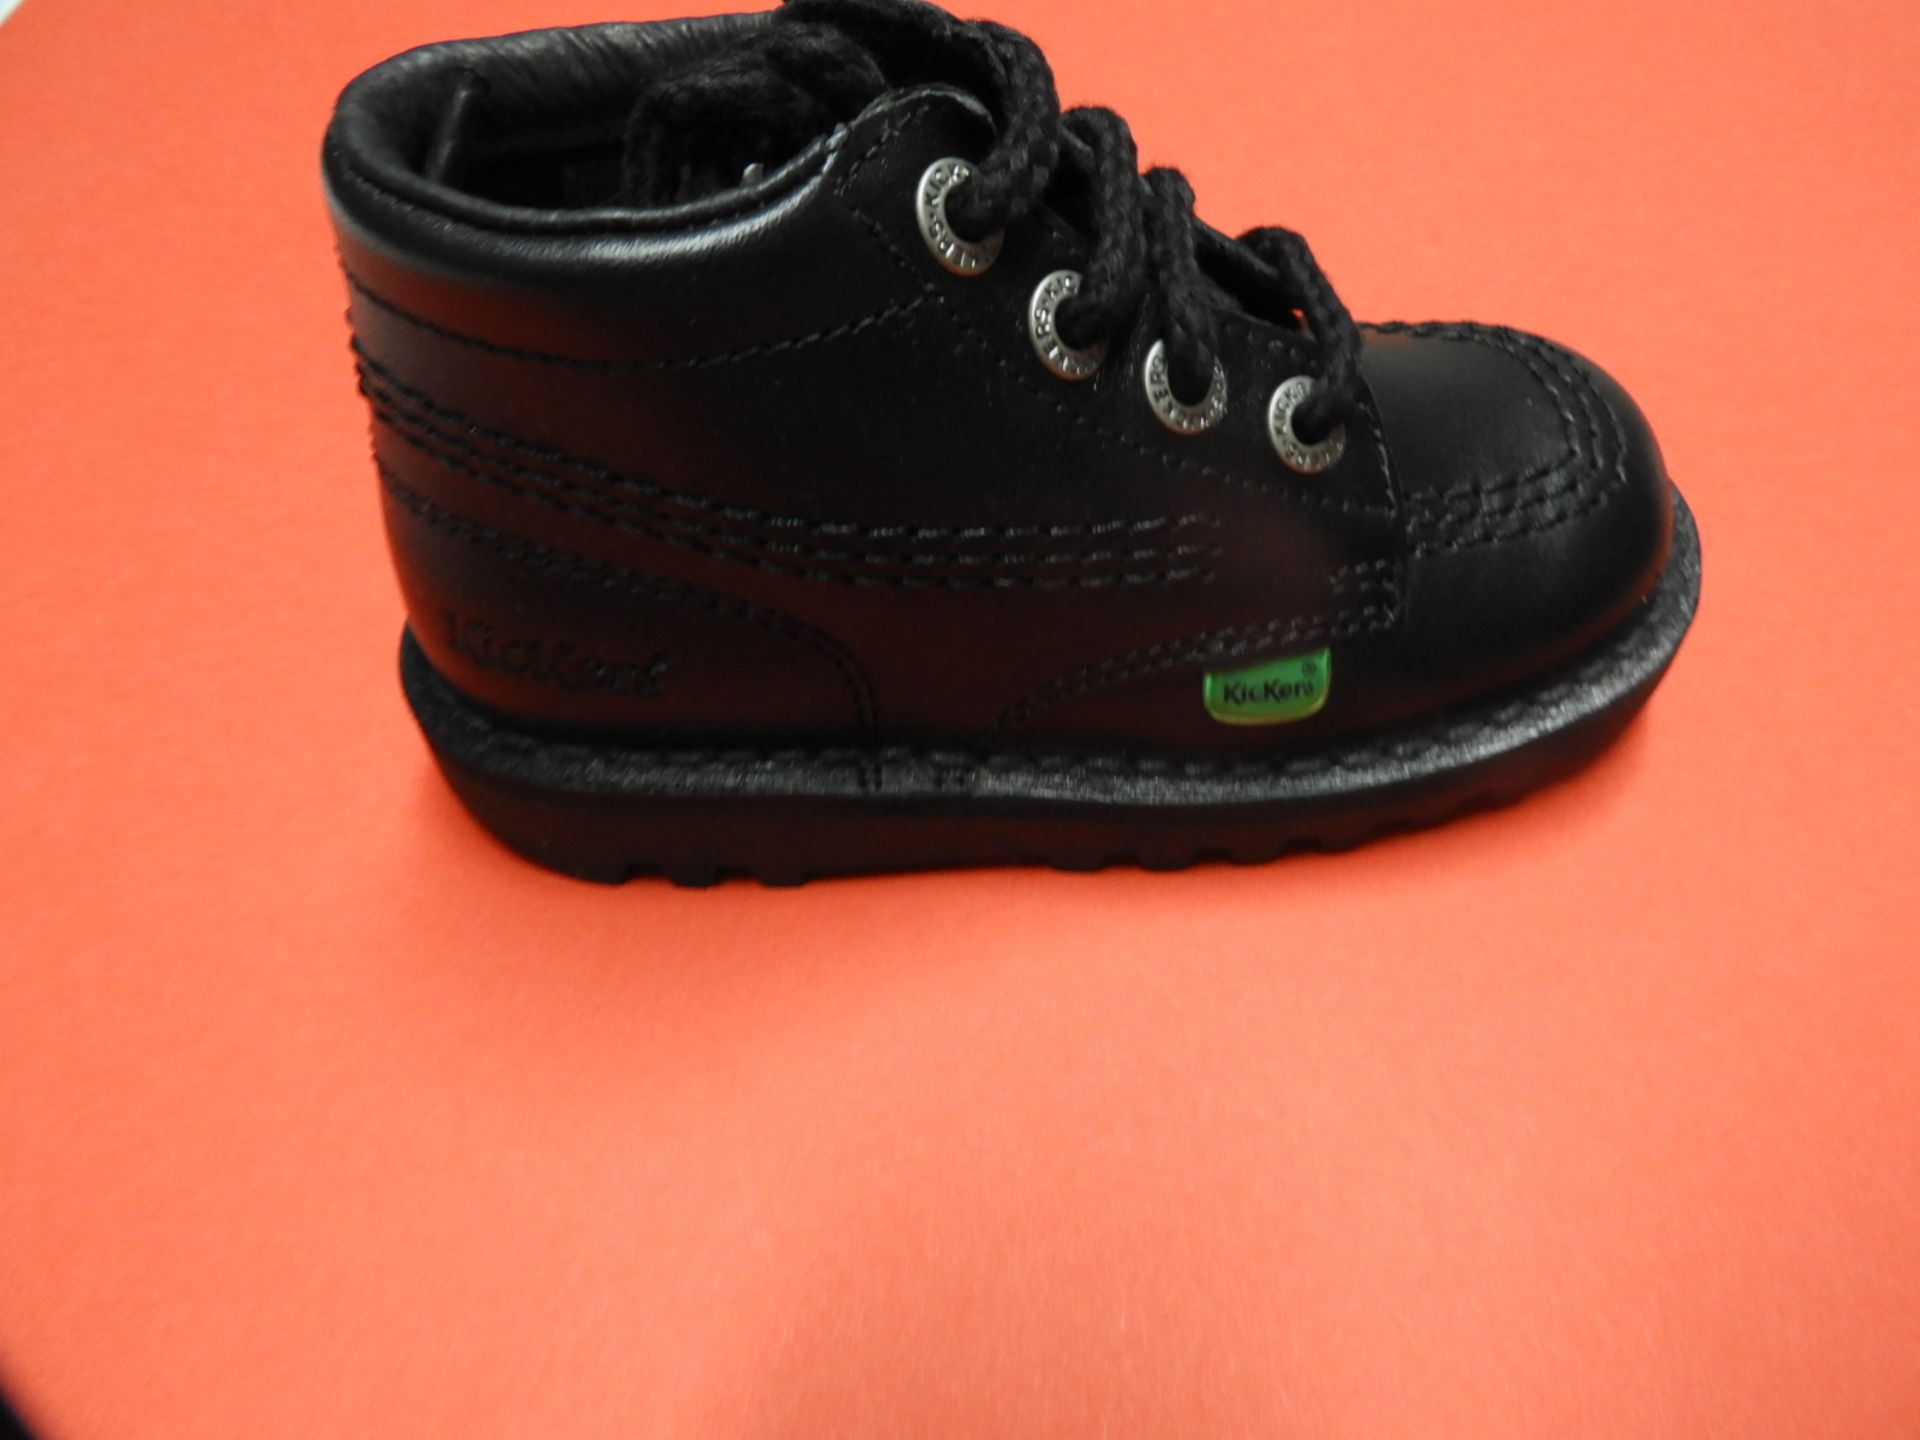 Pair of Kickers Children's Shoes (as per photograp